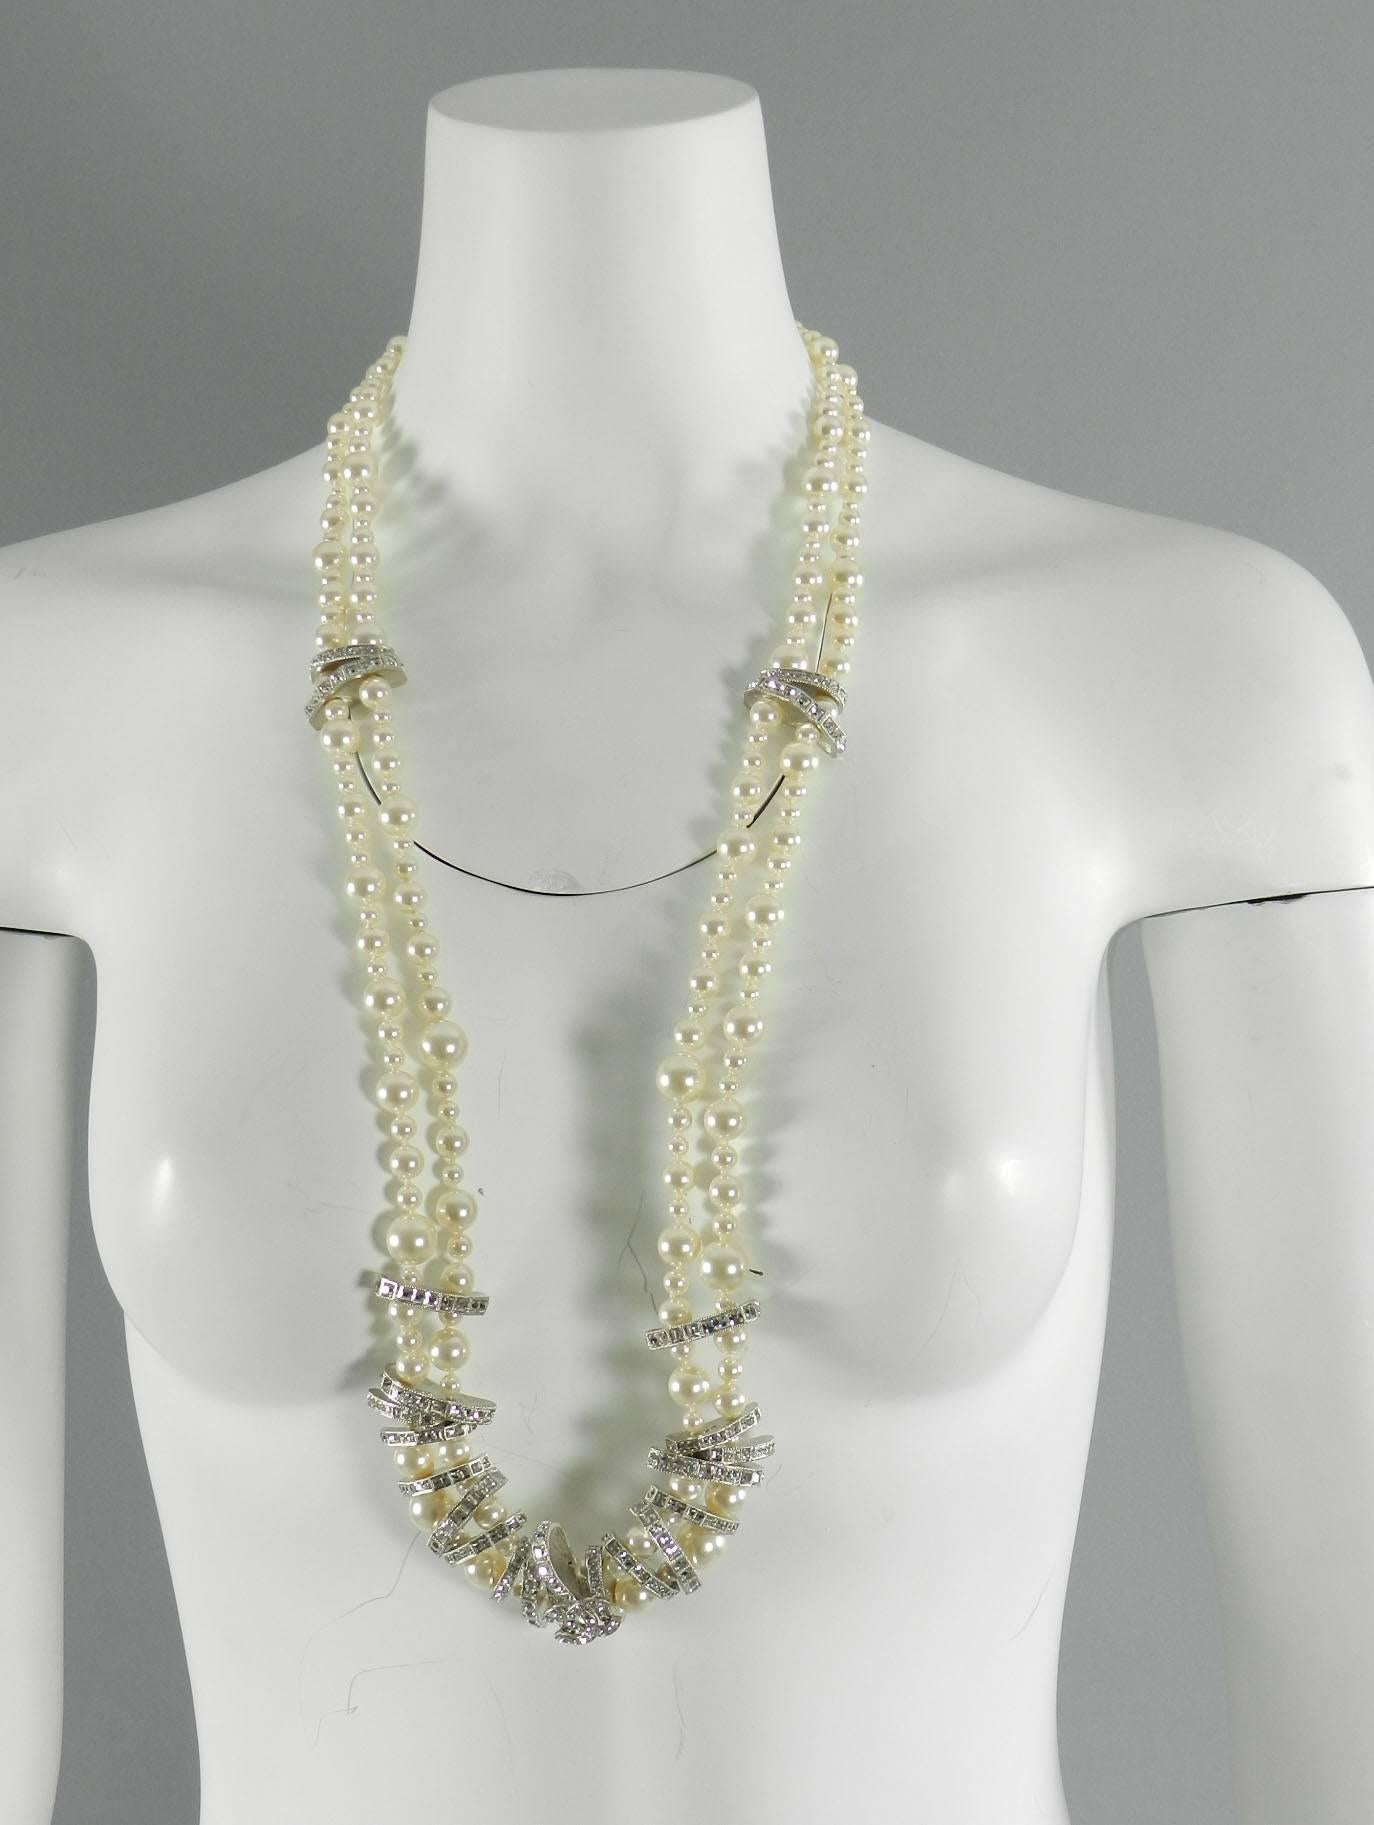 Women's Chanel 15P Long Double Strand Pearl Necklace with Rhinestones